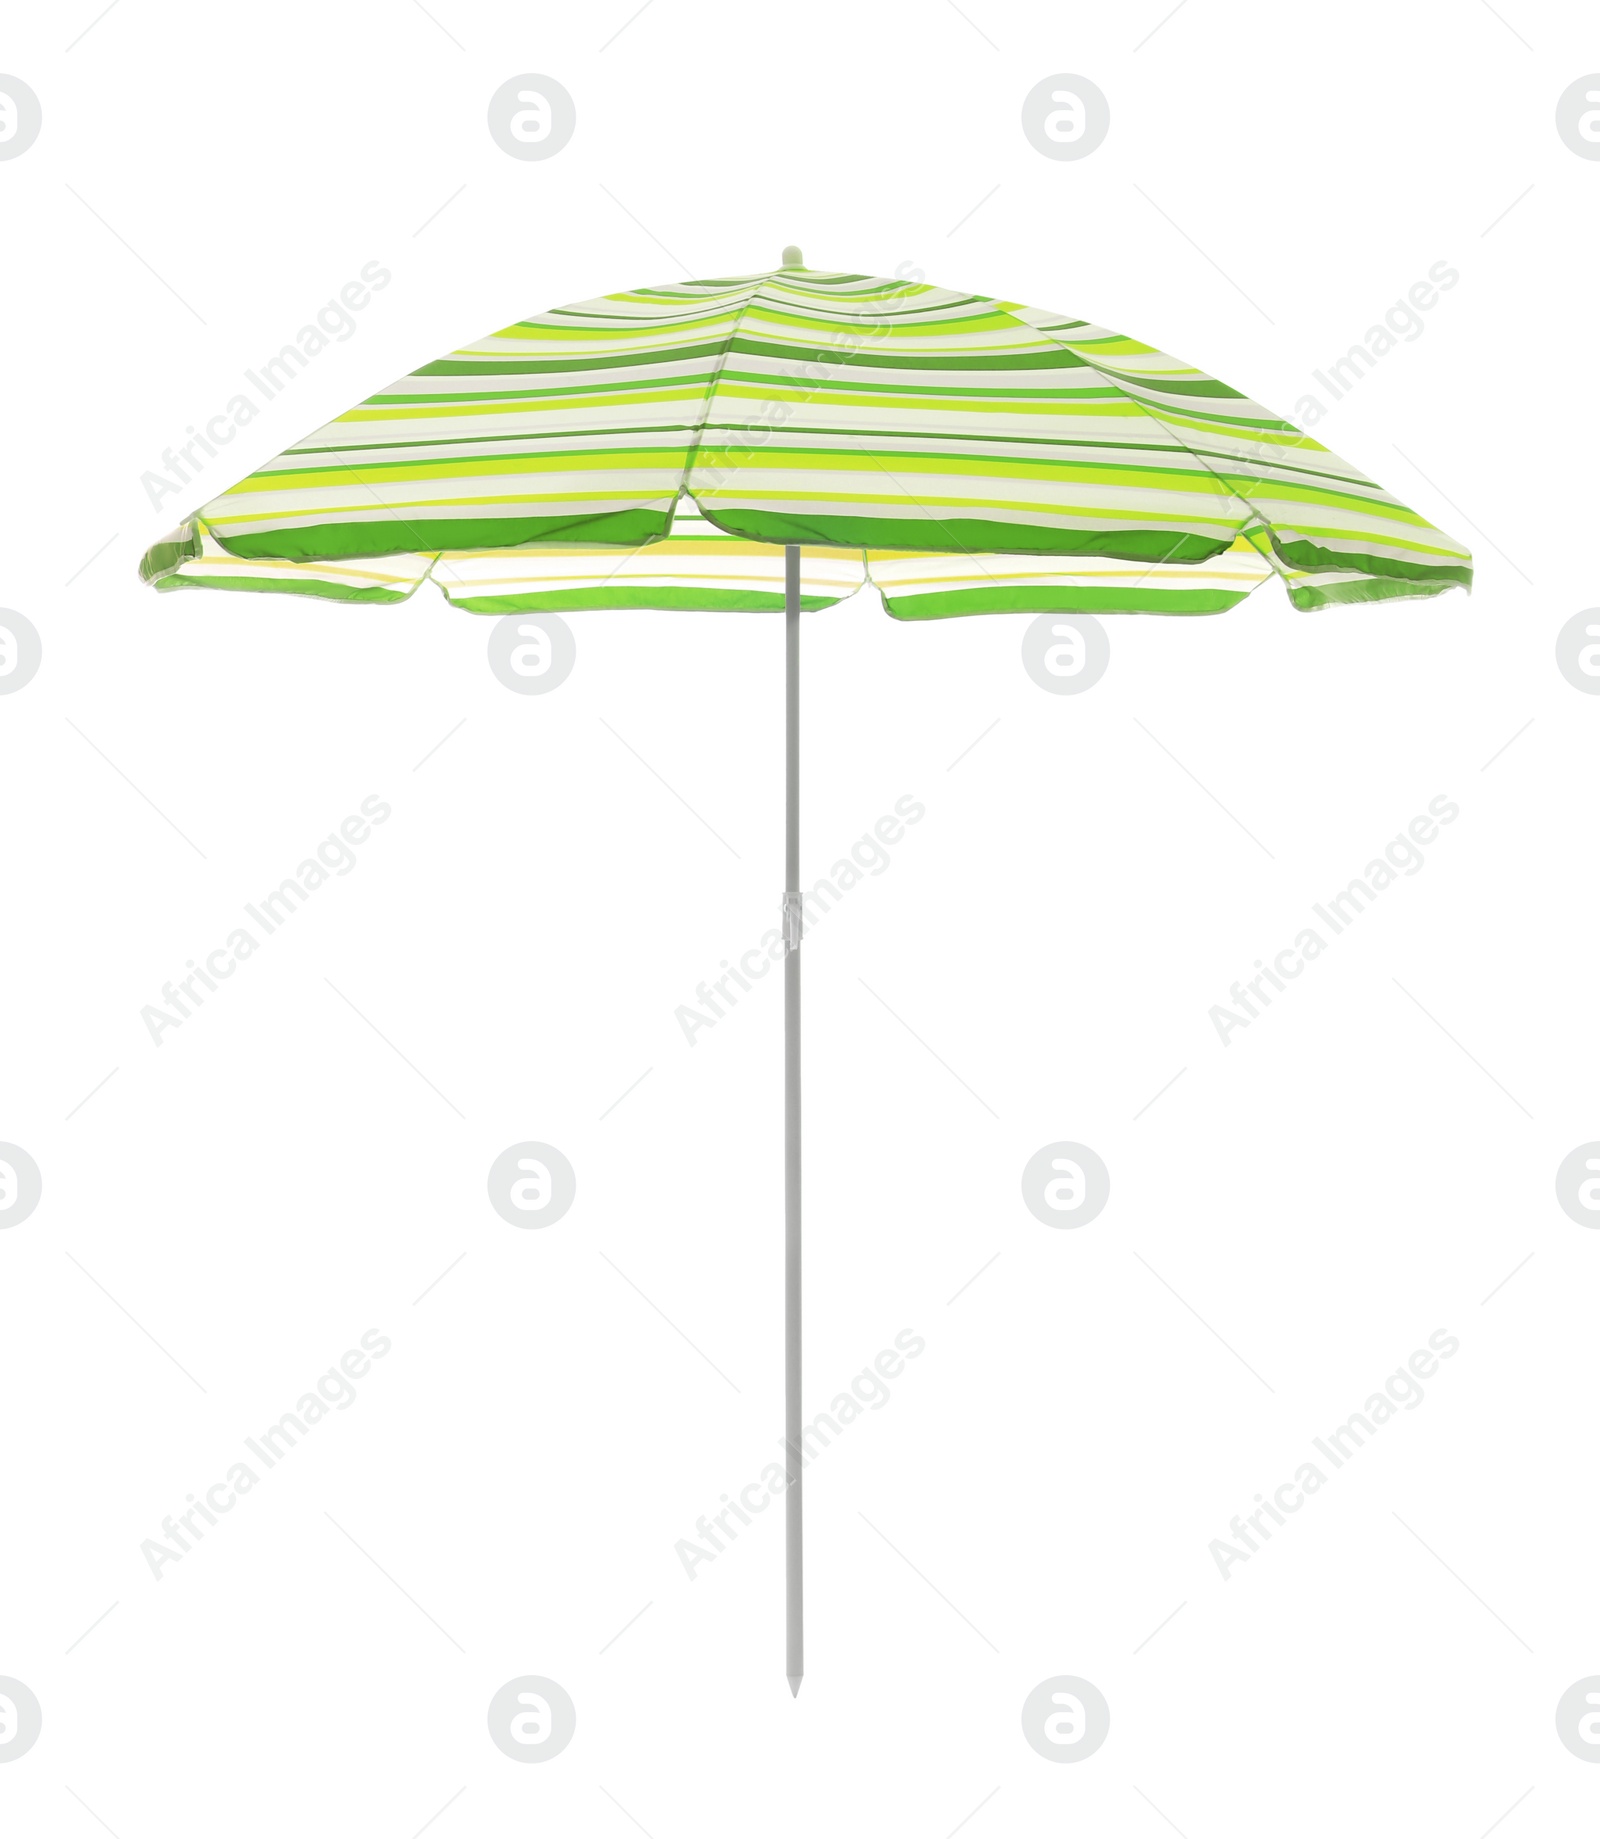 Image of Open striped beach umbrella isolated on white